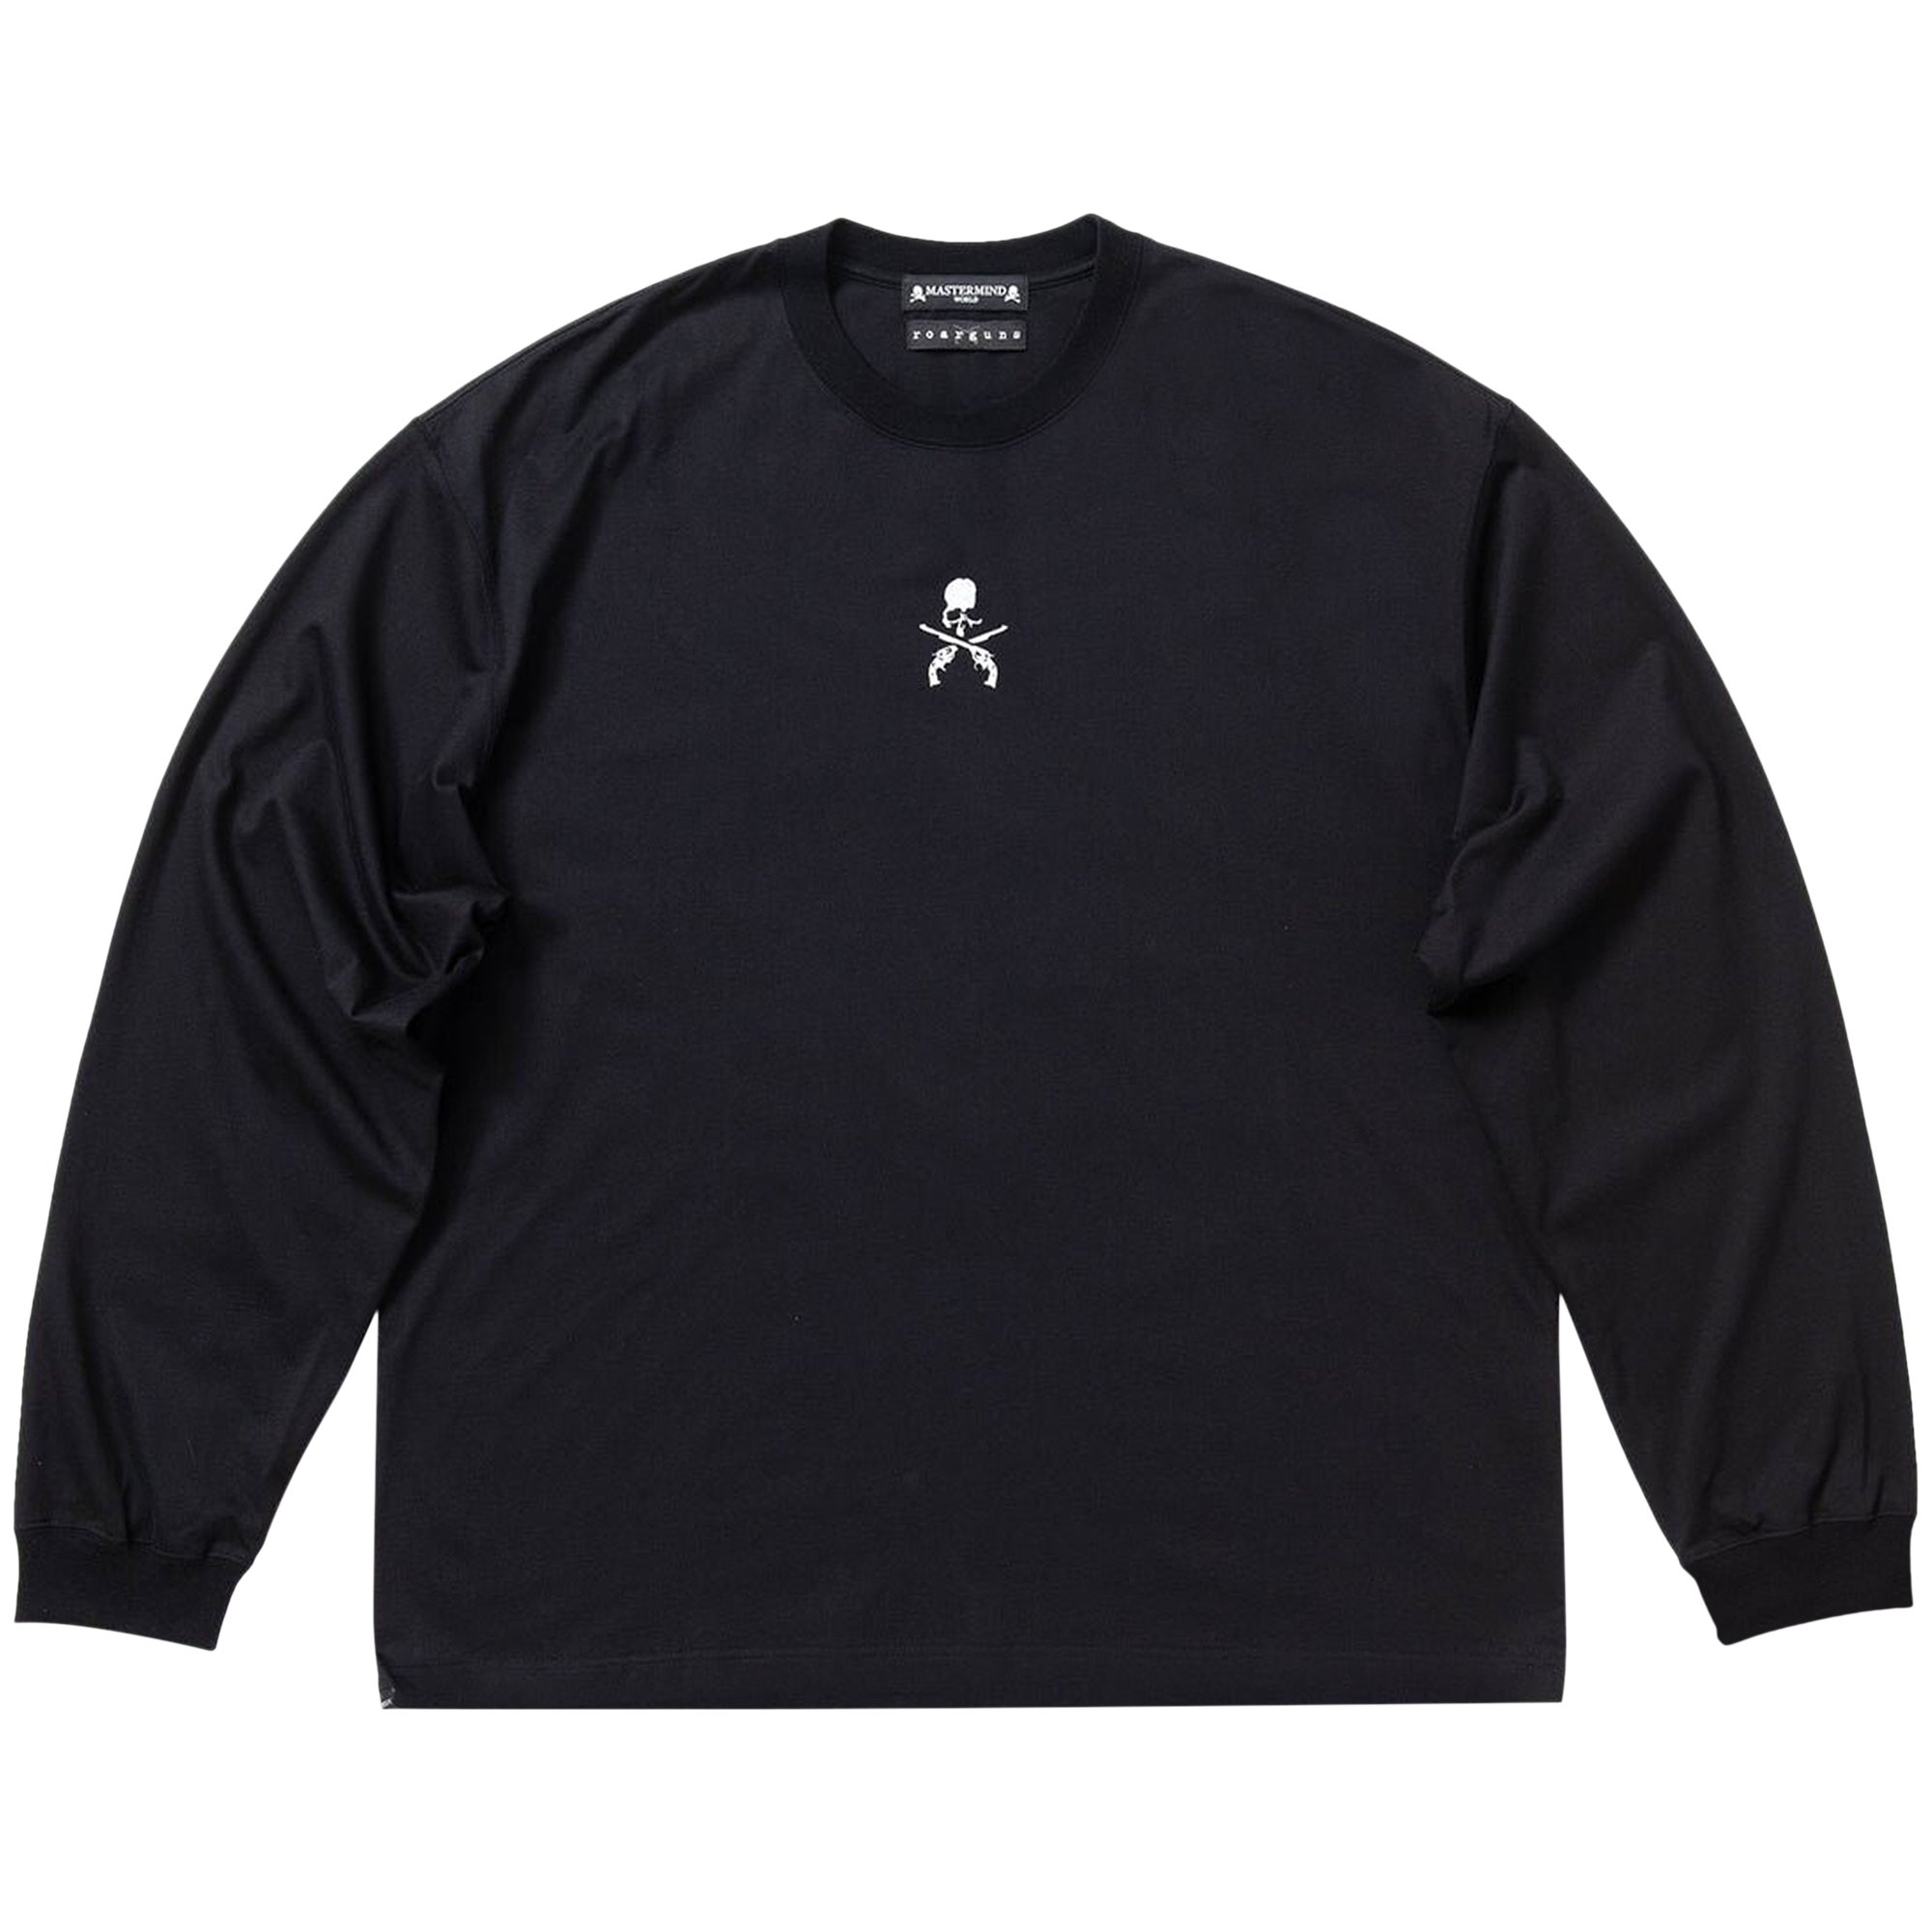 Buy Mastermind World x roarguns Long-Sleeve Relax Fit Tee 'Black 